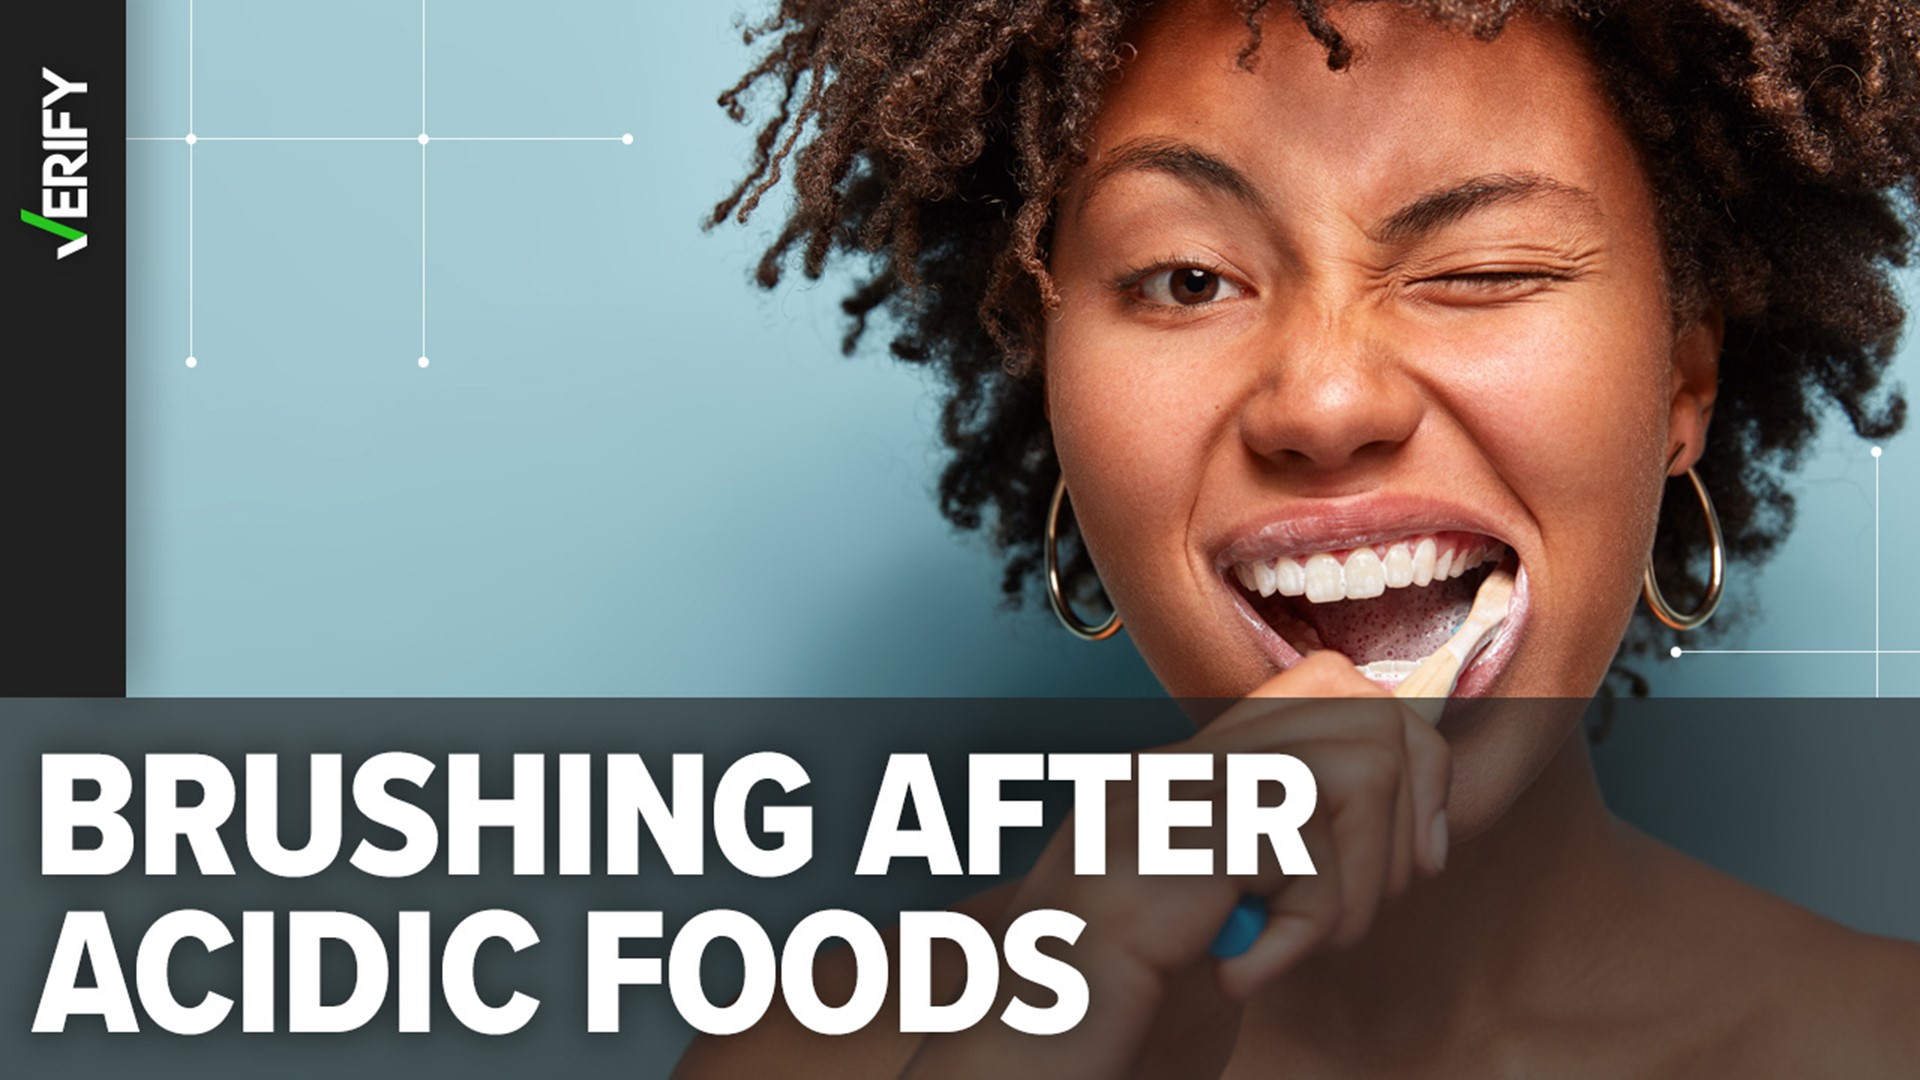 Brushing too soon after eating or drinking something acidic can do more harm than good to your teeth.